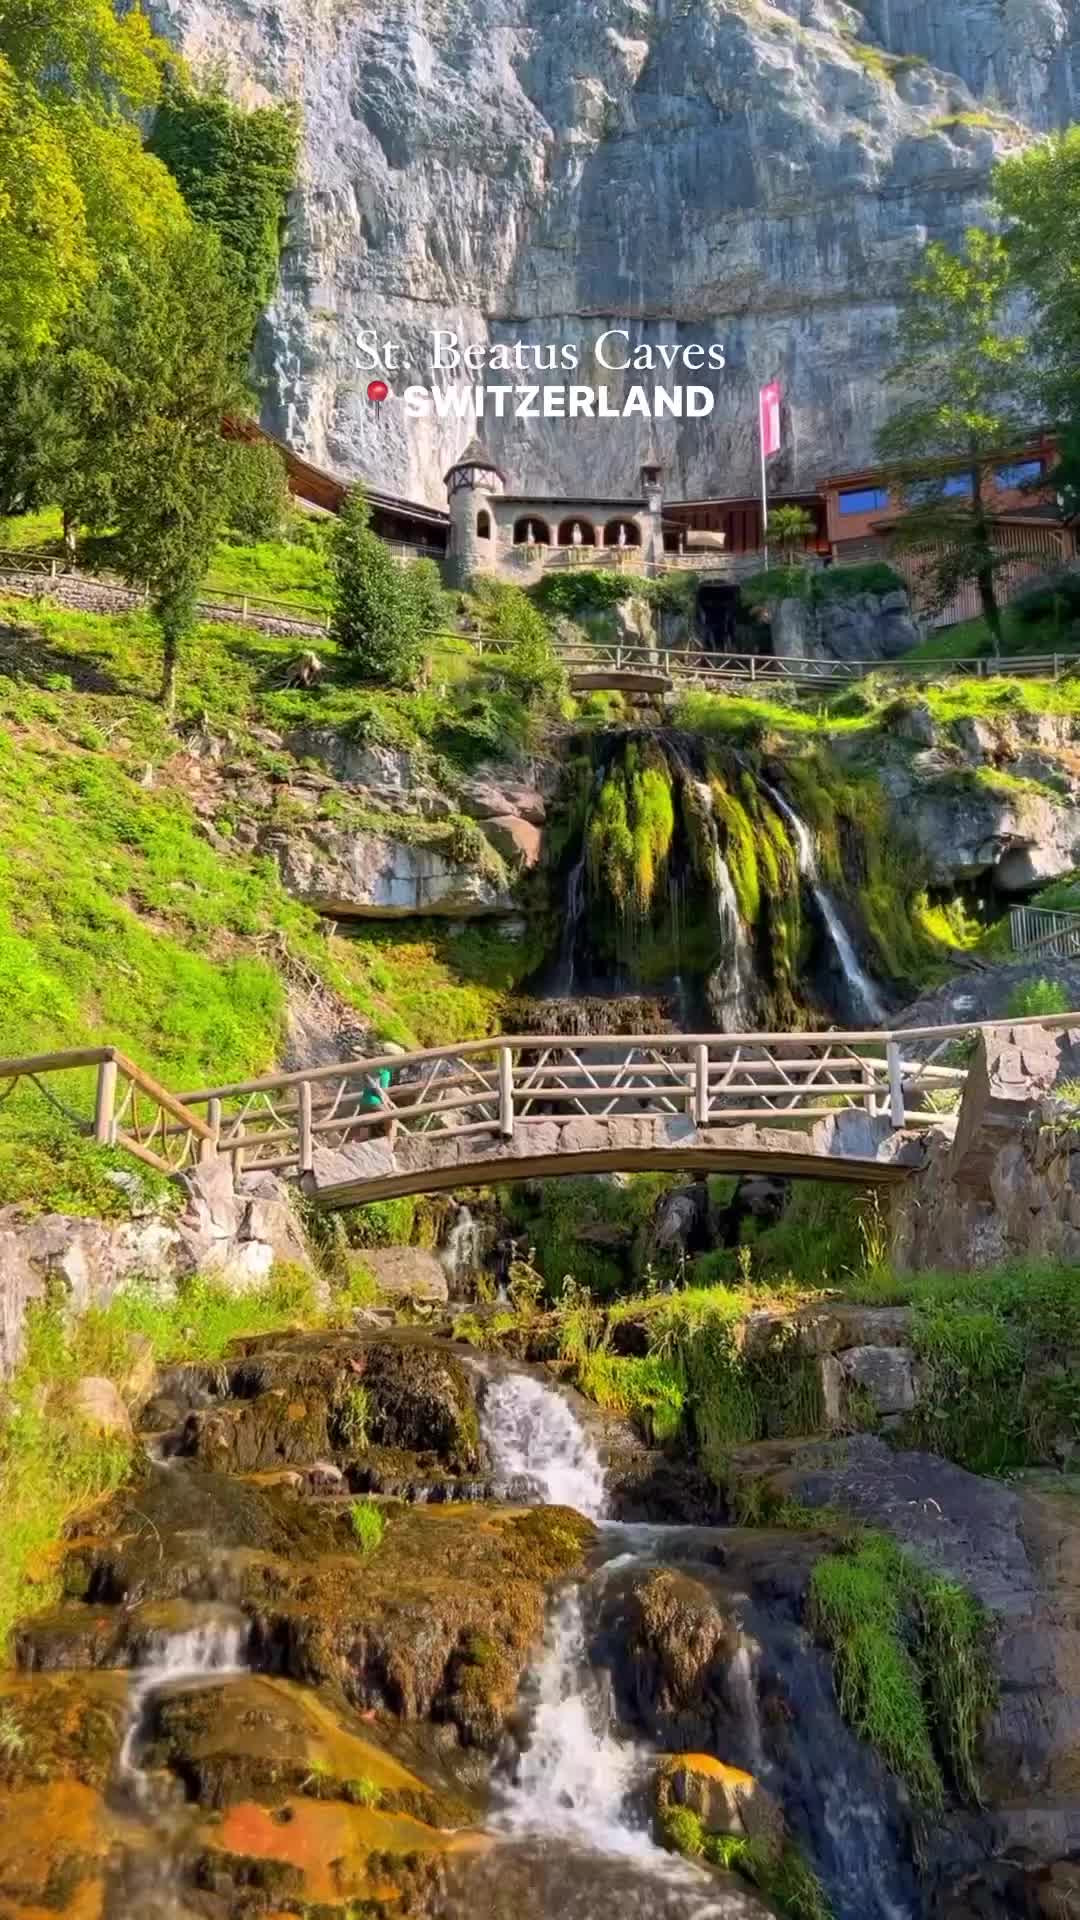 Discover Rivendell at St. Beatus Caves in Switzerland